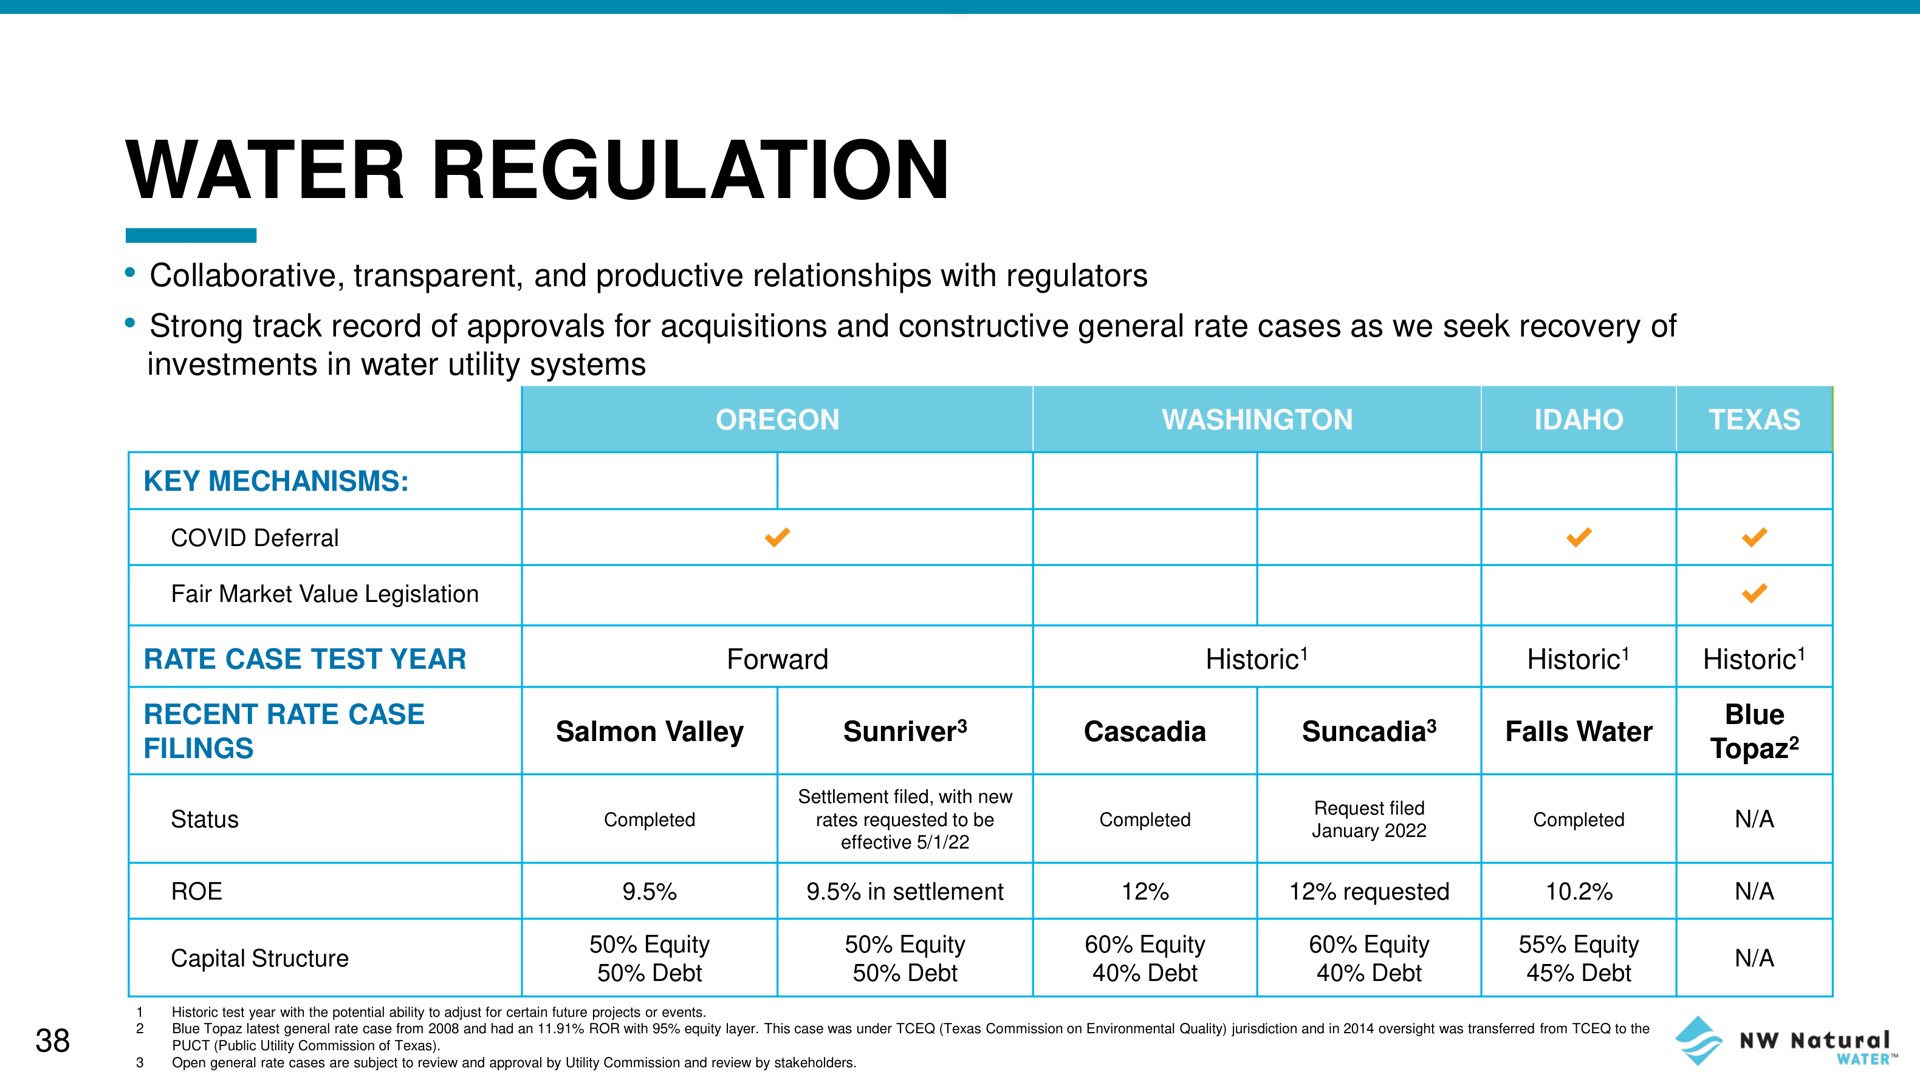 water regulation key mechanisms | NW Natural Holdings